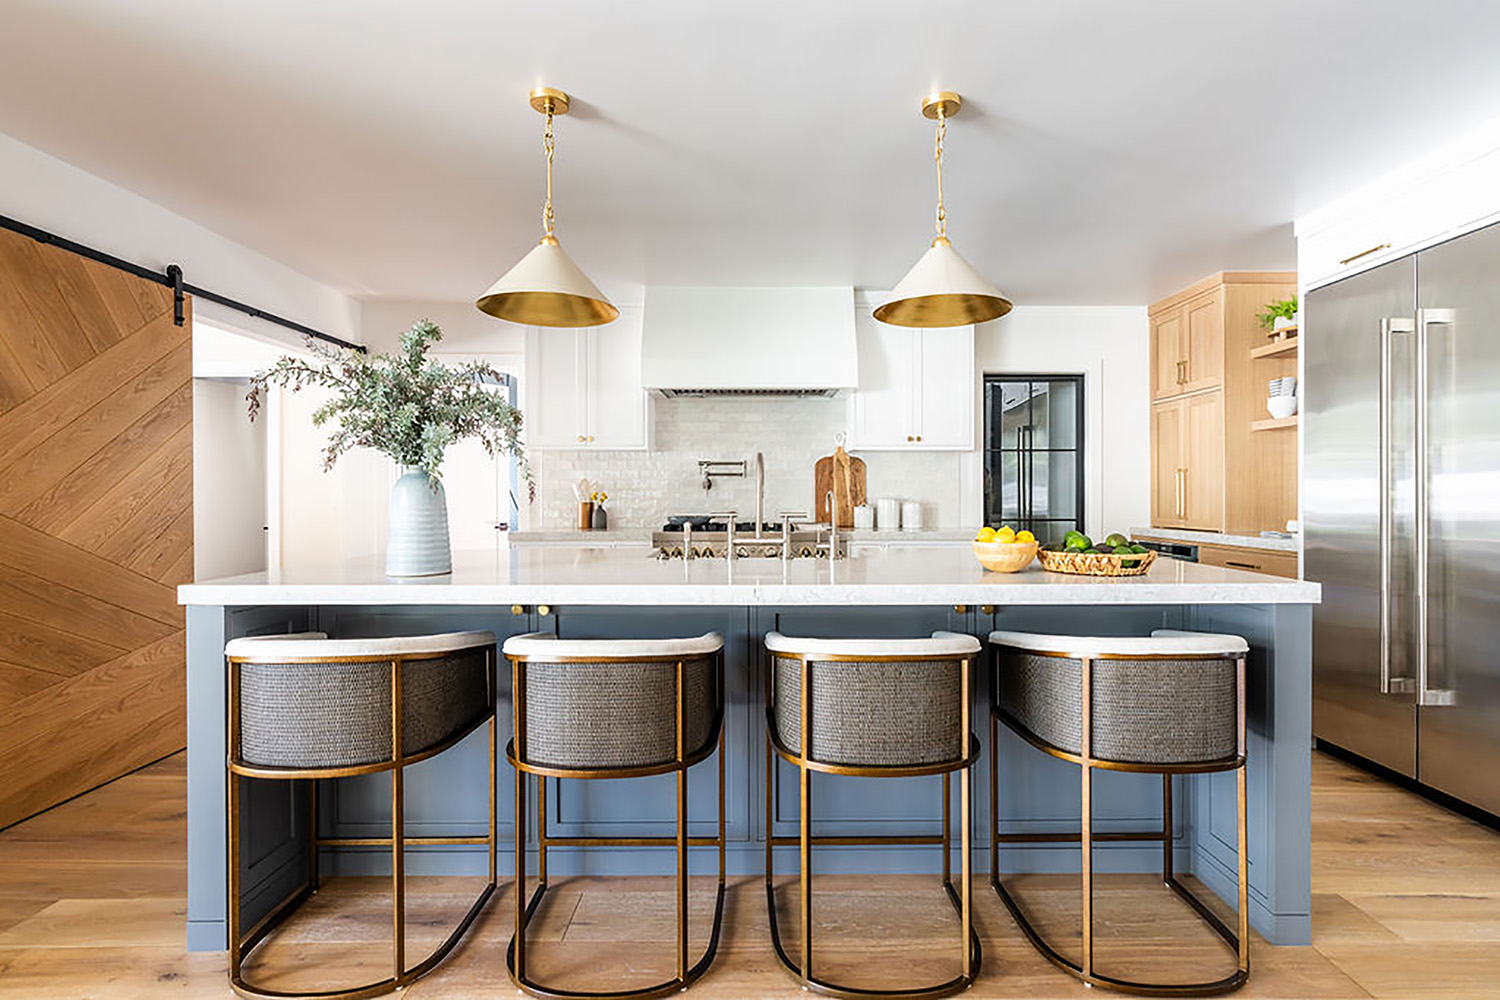 bright modern kitchen design with blue island, barrel style chairs and cone light fixtures